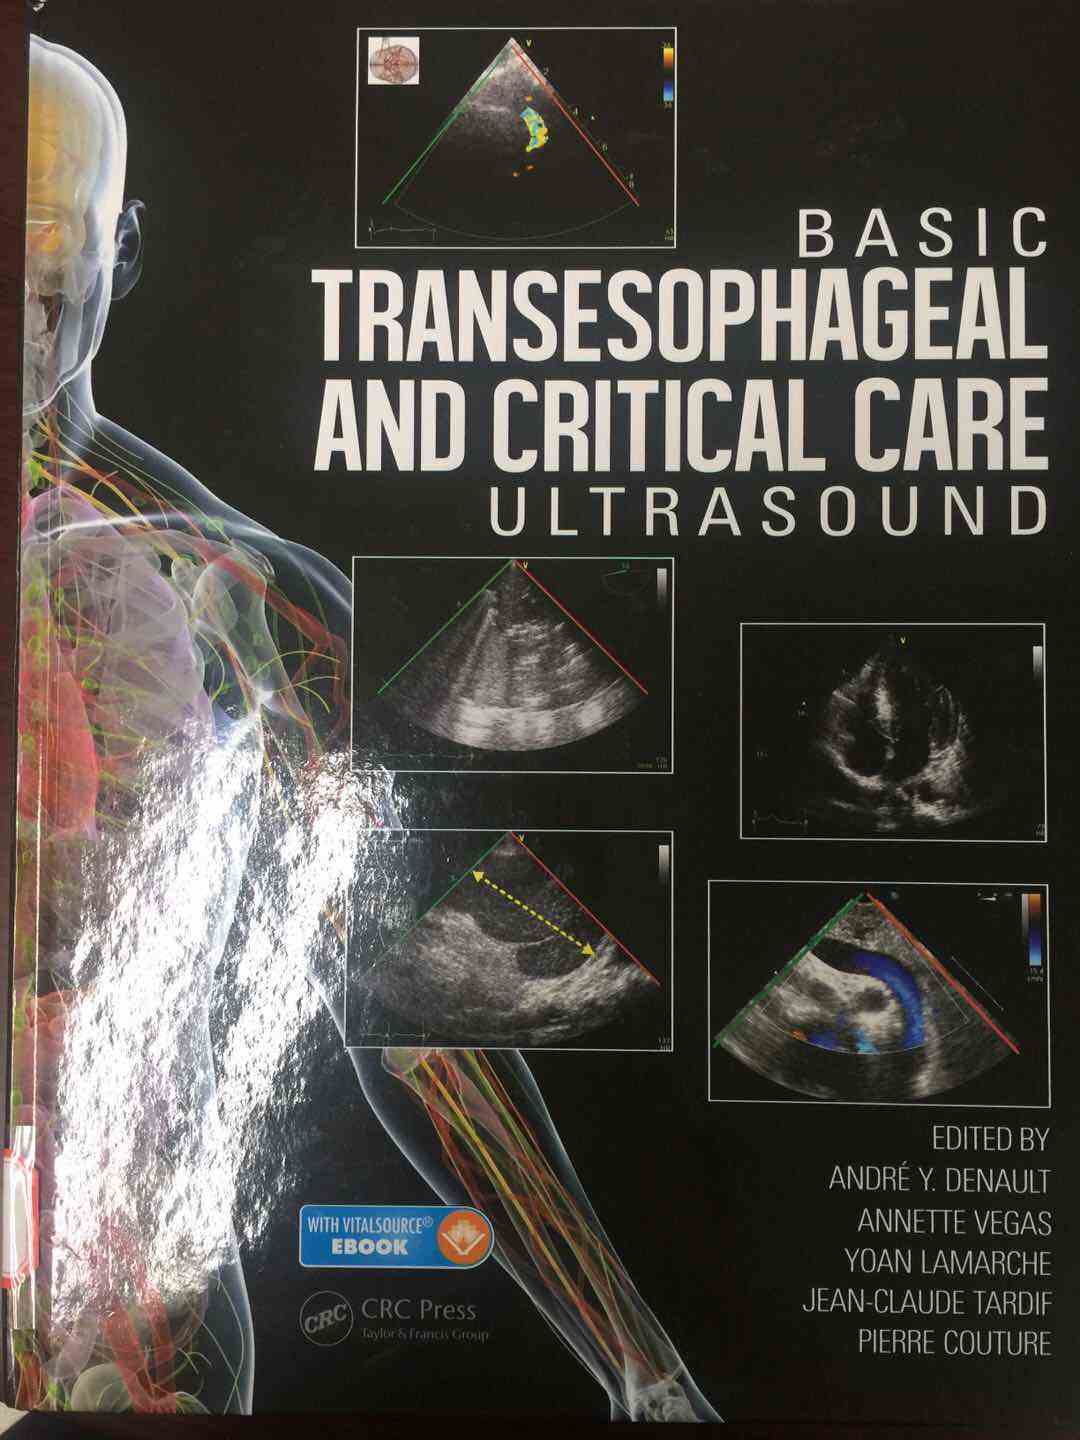 《Basic Transesophageal and Critical Care Ultrasound》